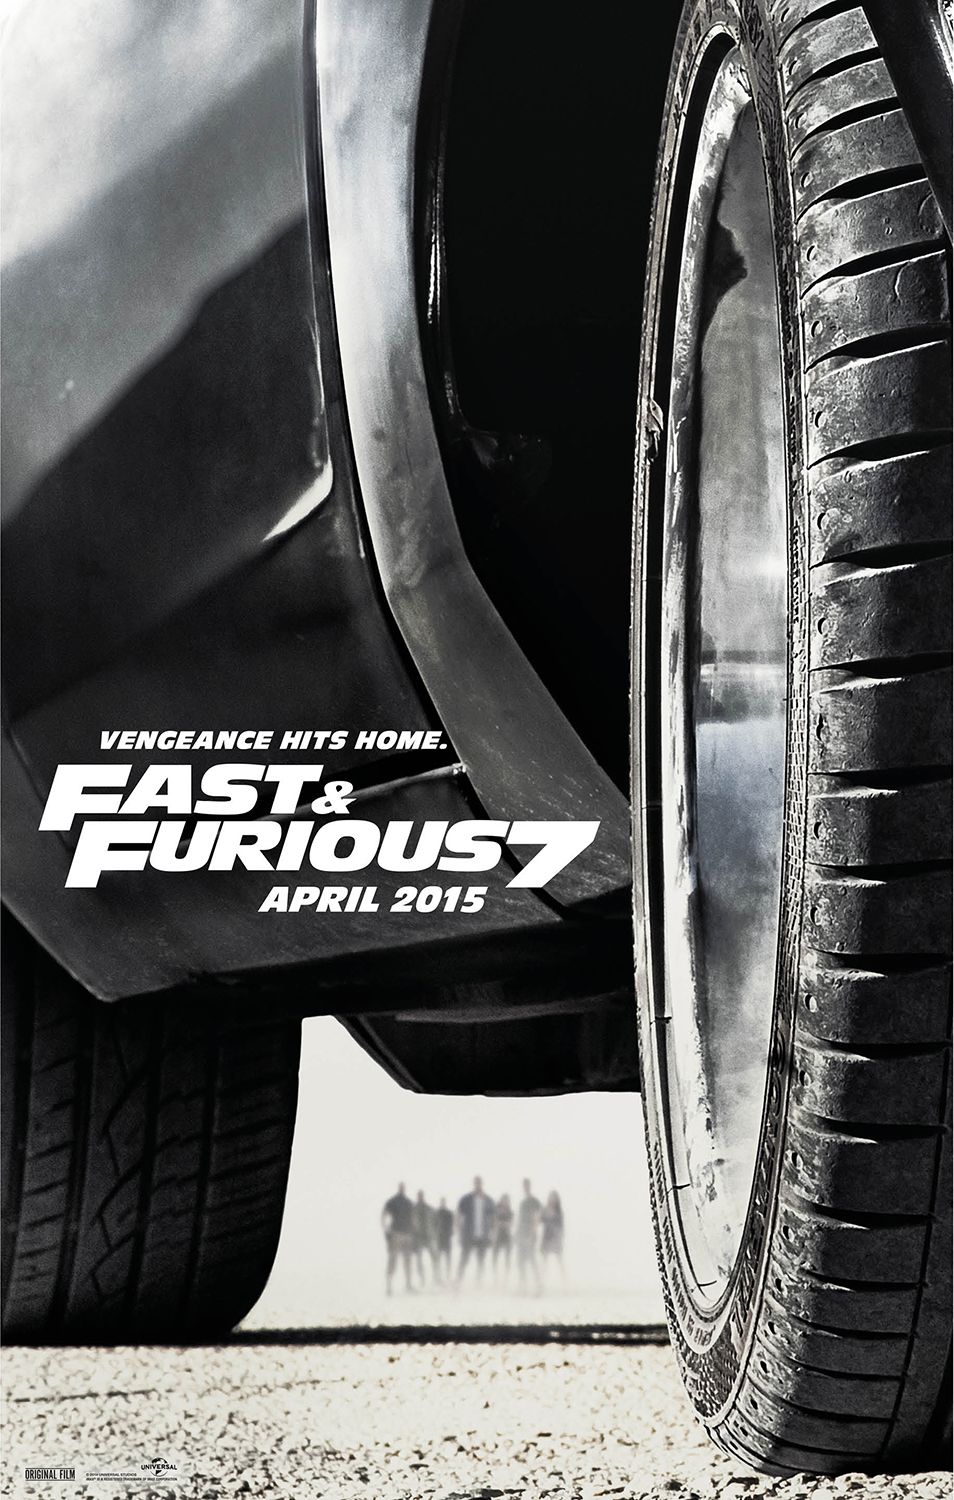 Vengeance Hits Home in New Poster for 'Fast & Furious 7'